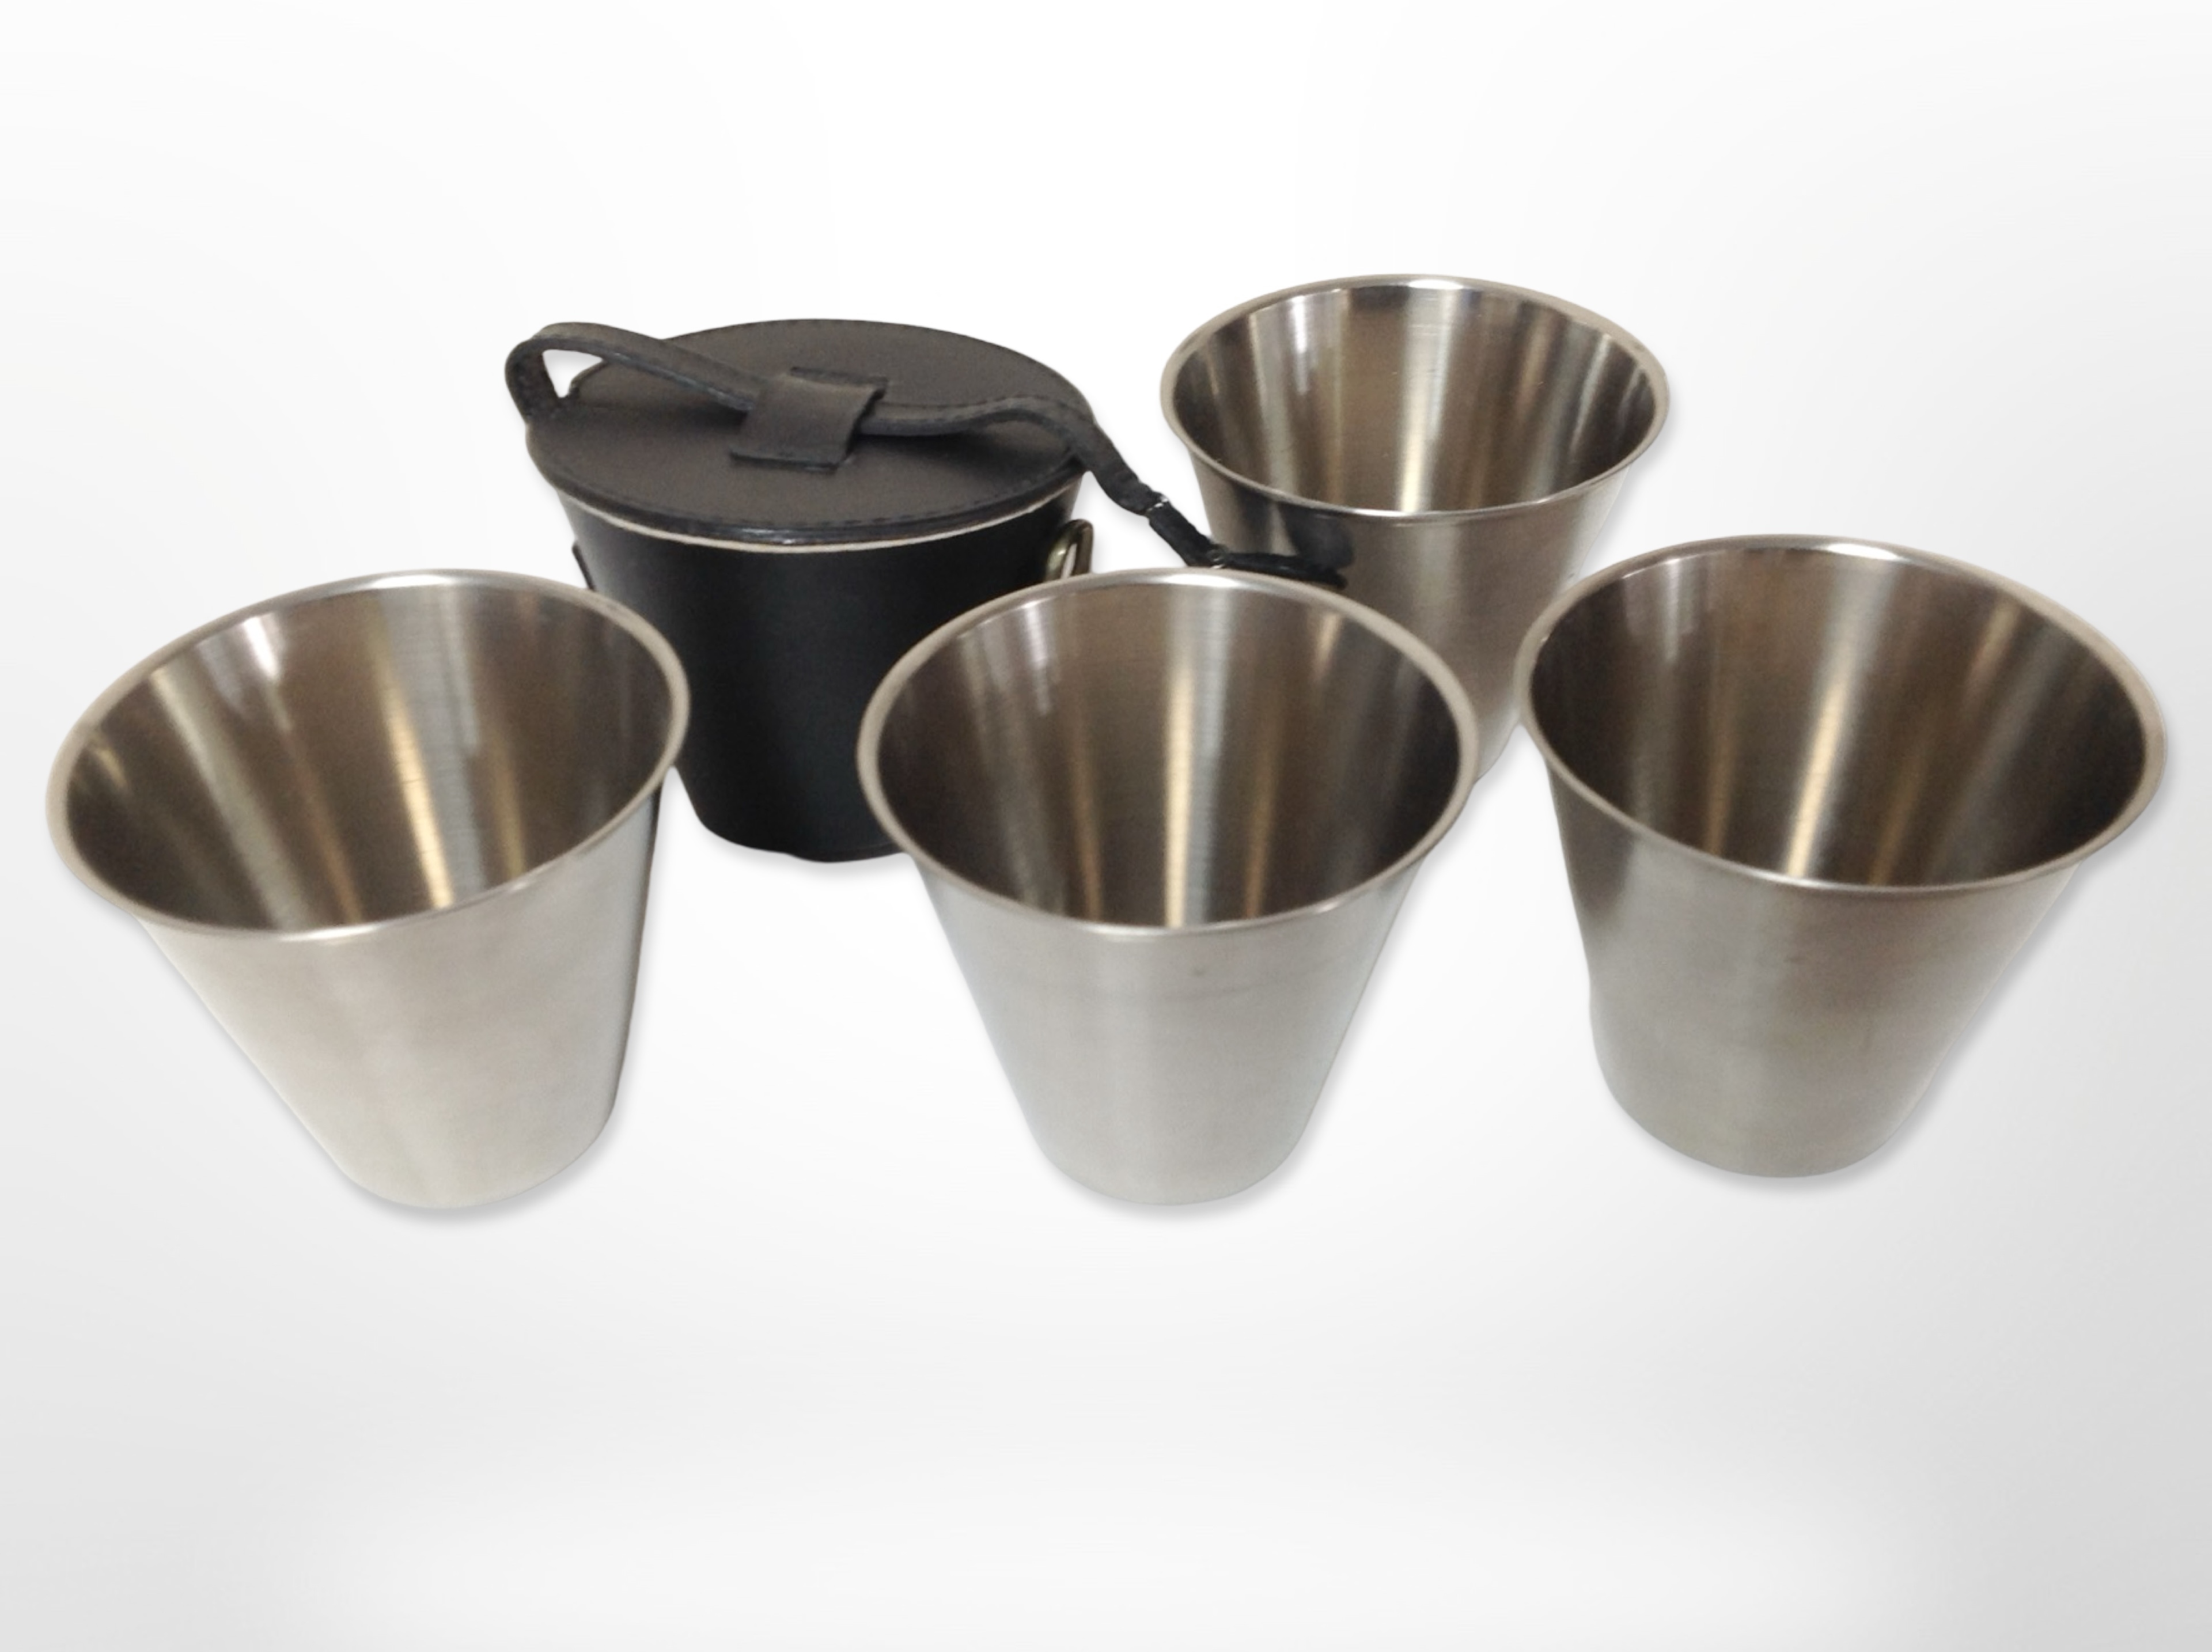 A set of four Harrods travelling drinking cups in leather case.